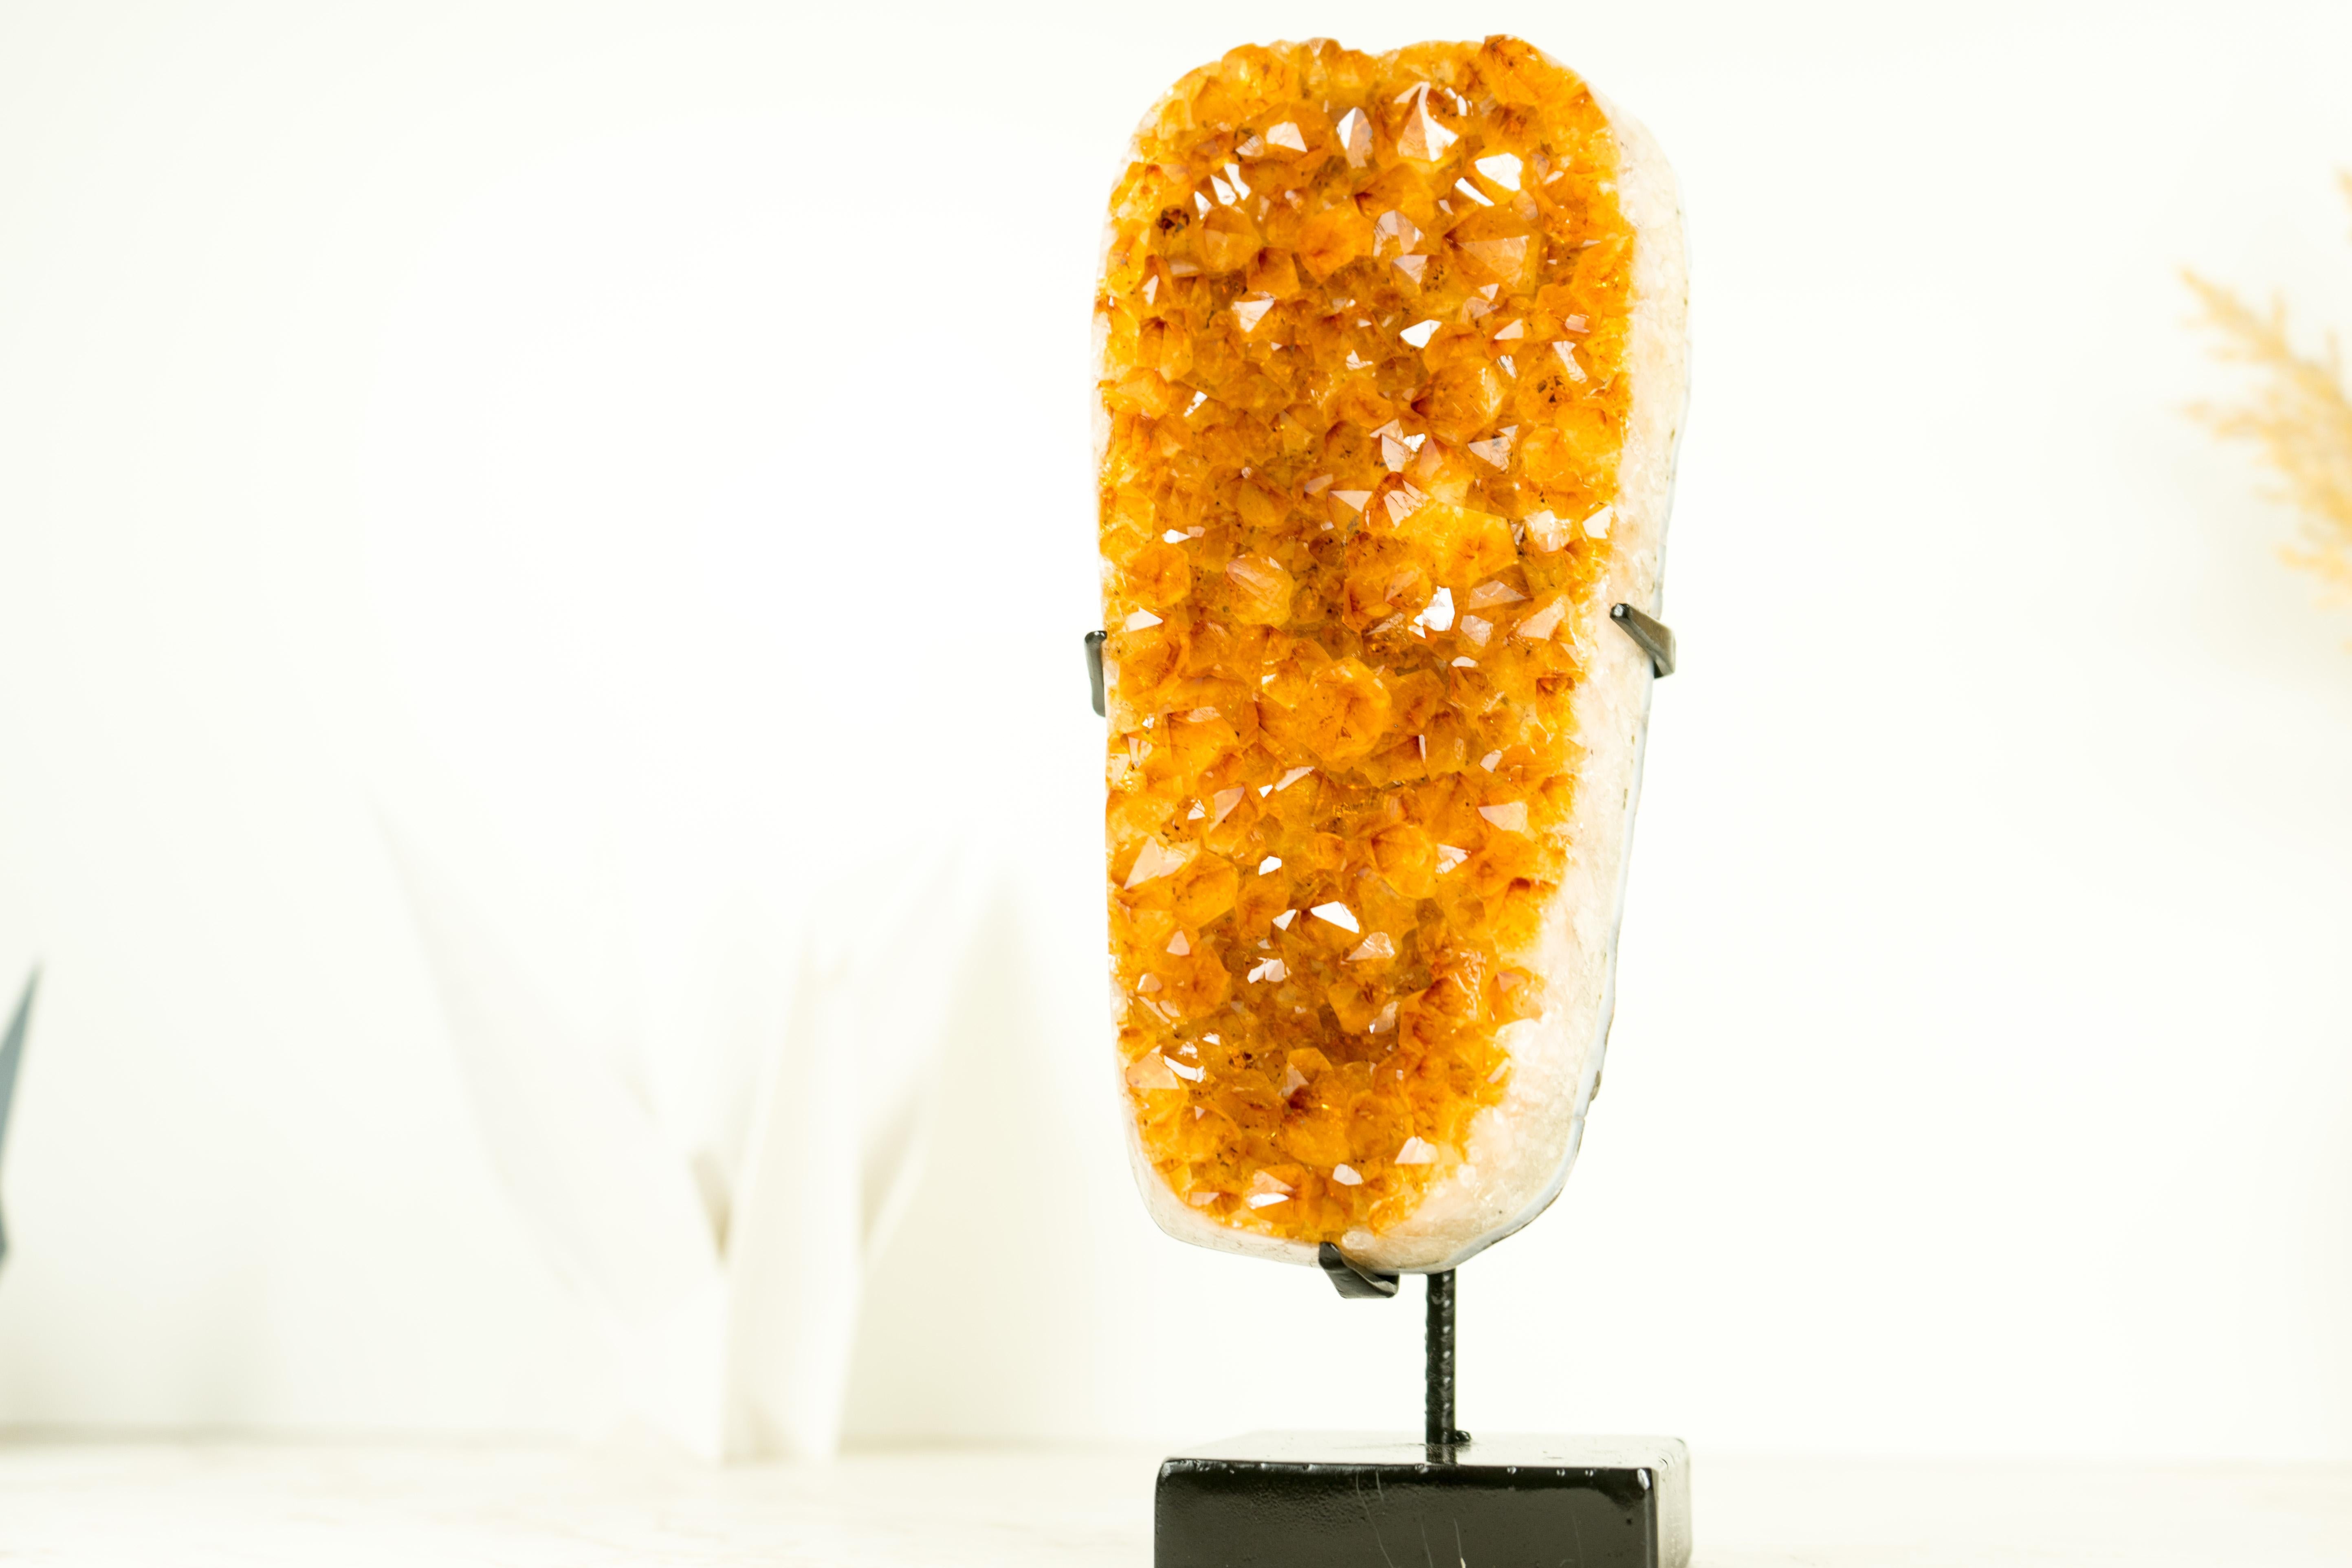 With its beautiful formations, radiant Golde Orange Citrine color, and wonderful aesthetics, this Citrine Specimen is the perfect addition to your crystal collection or a gorgeous decor piece for your console, desk, or shelf.

The Golden Citrine is